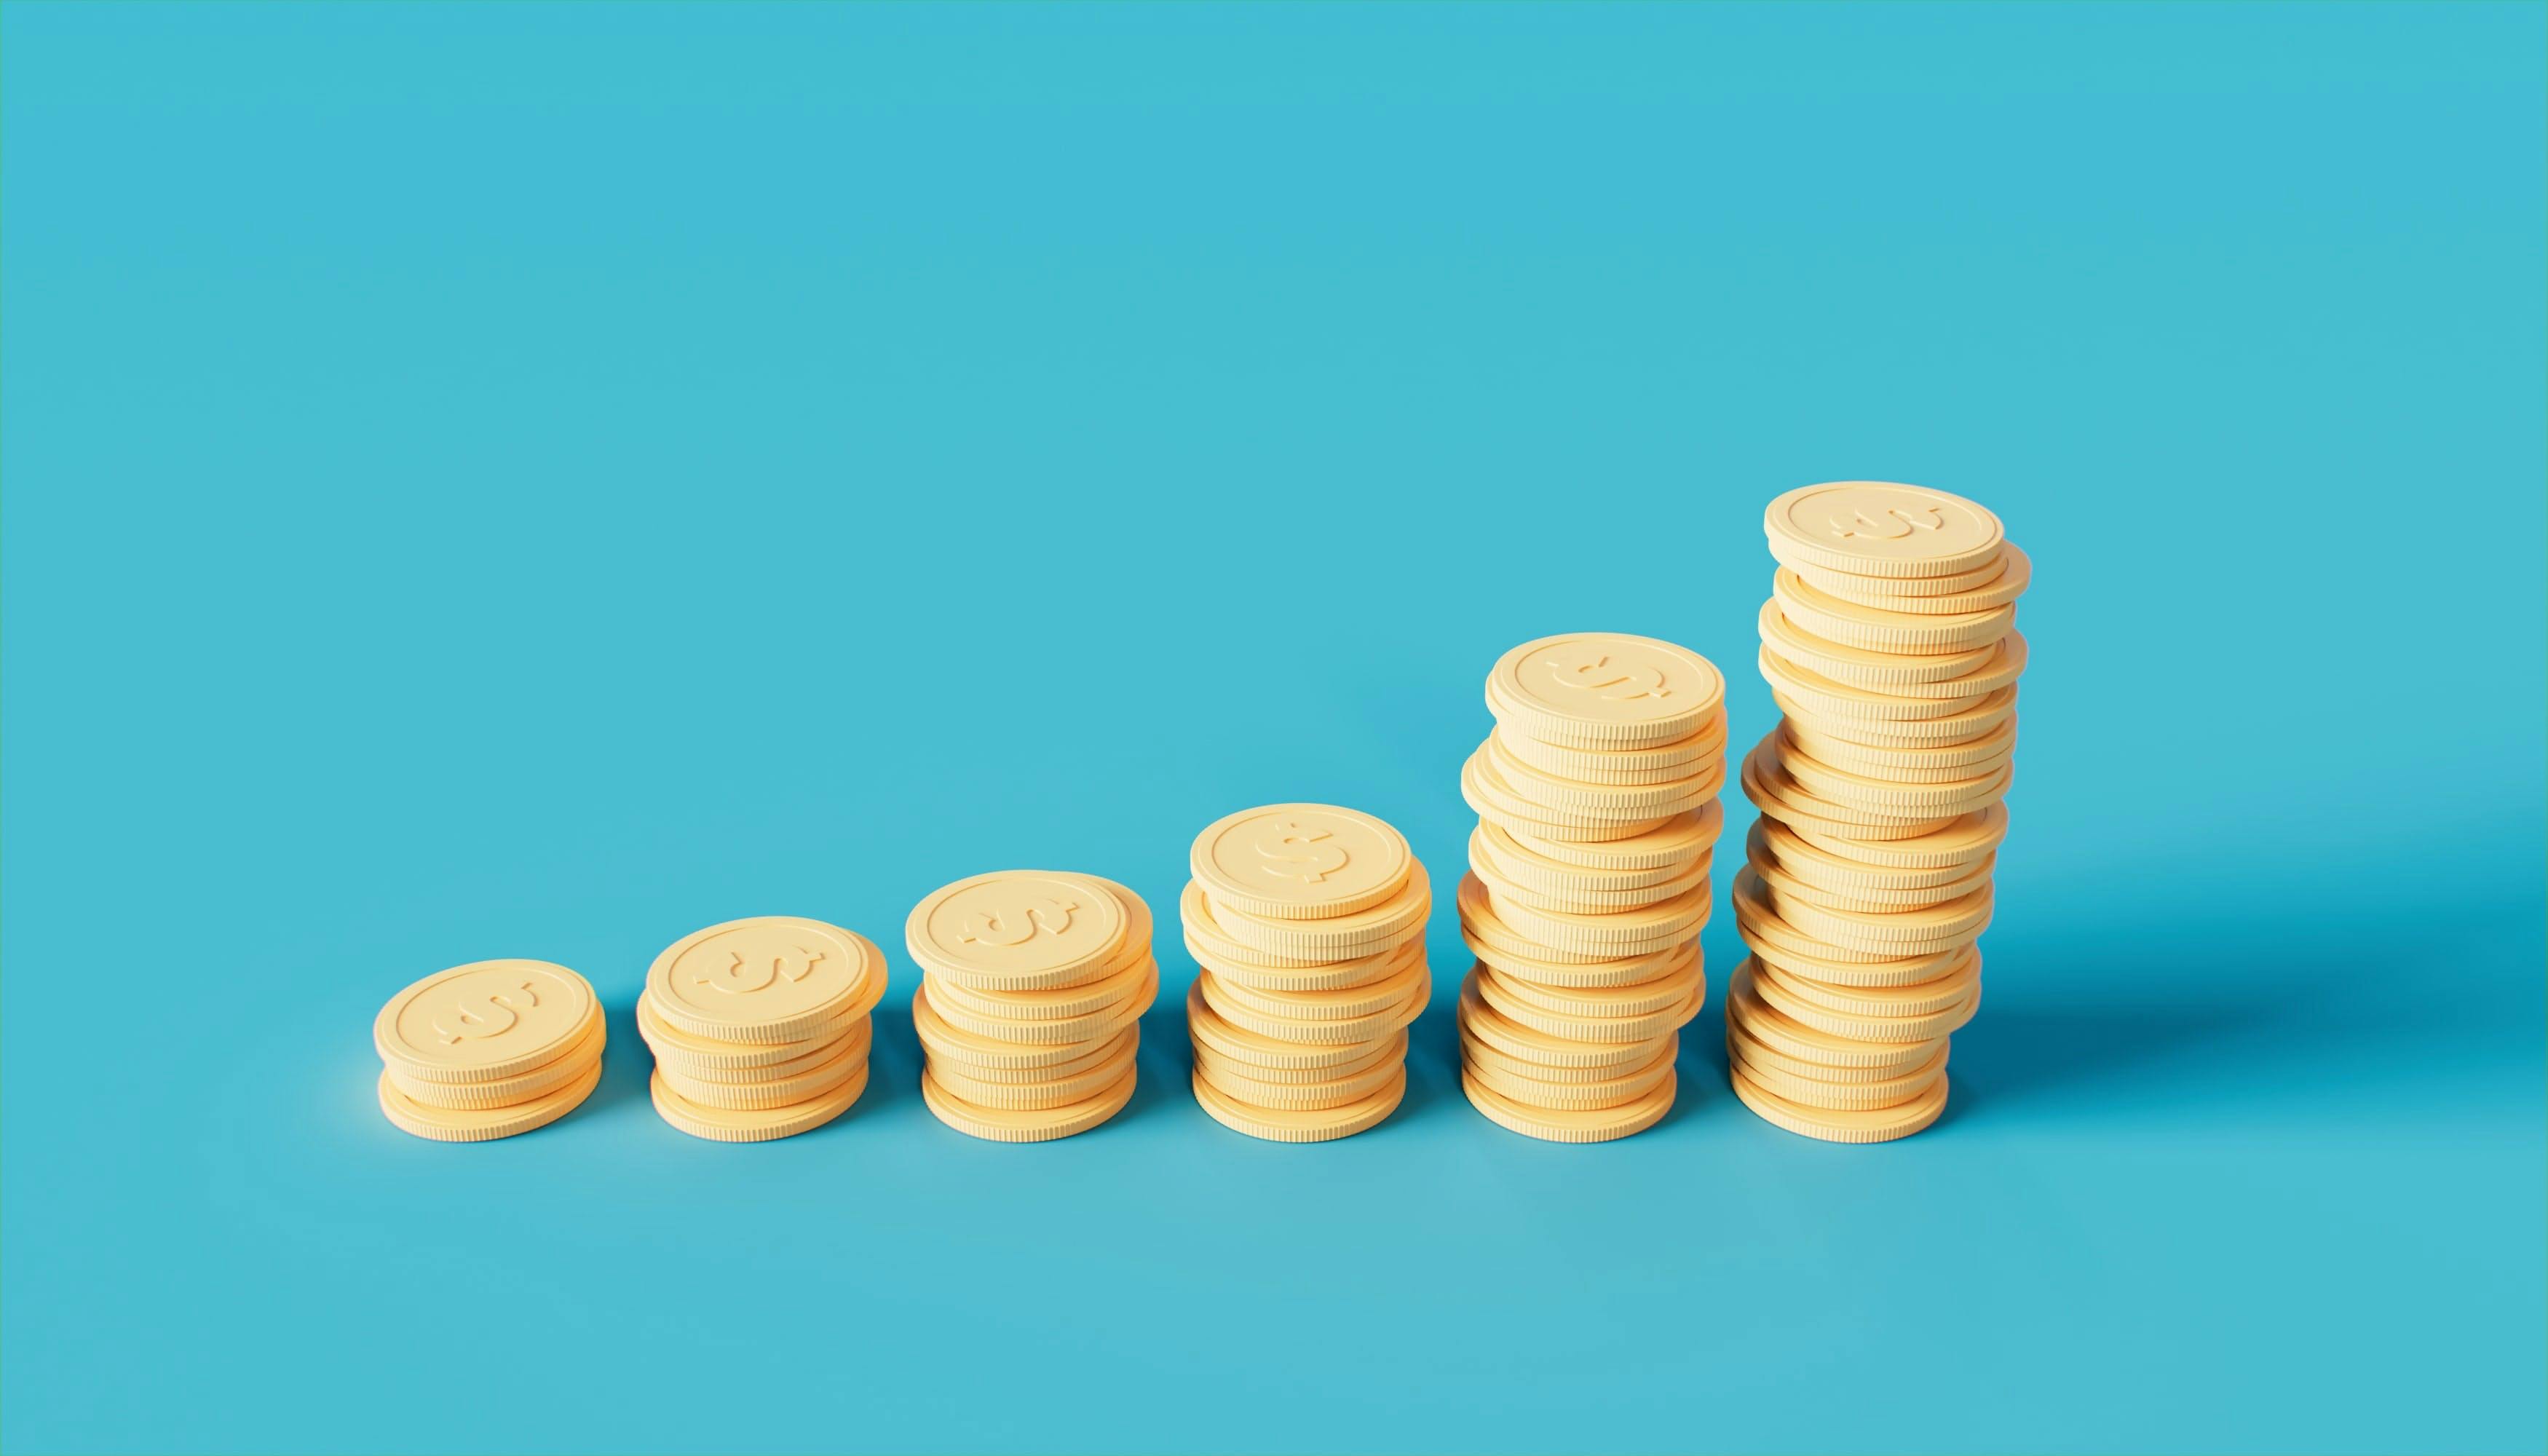 Stacks of yellow coins on top of a blue background.